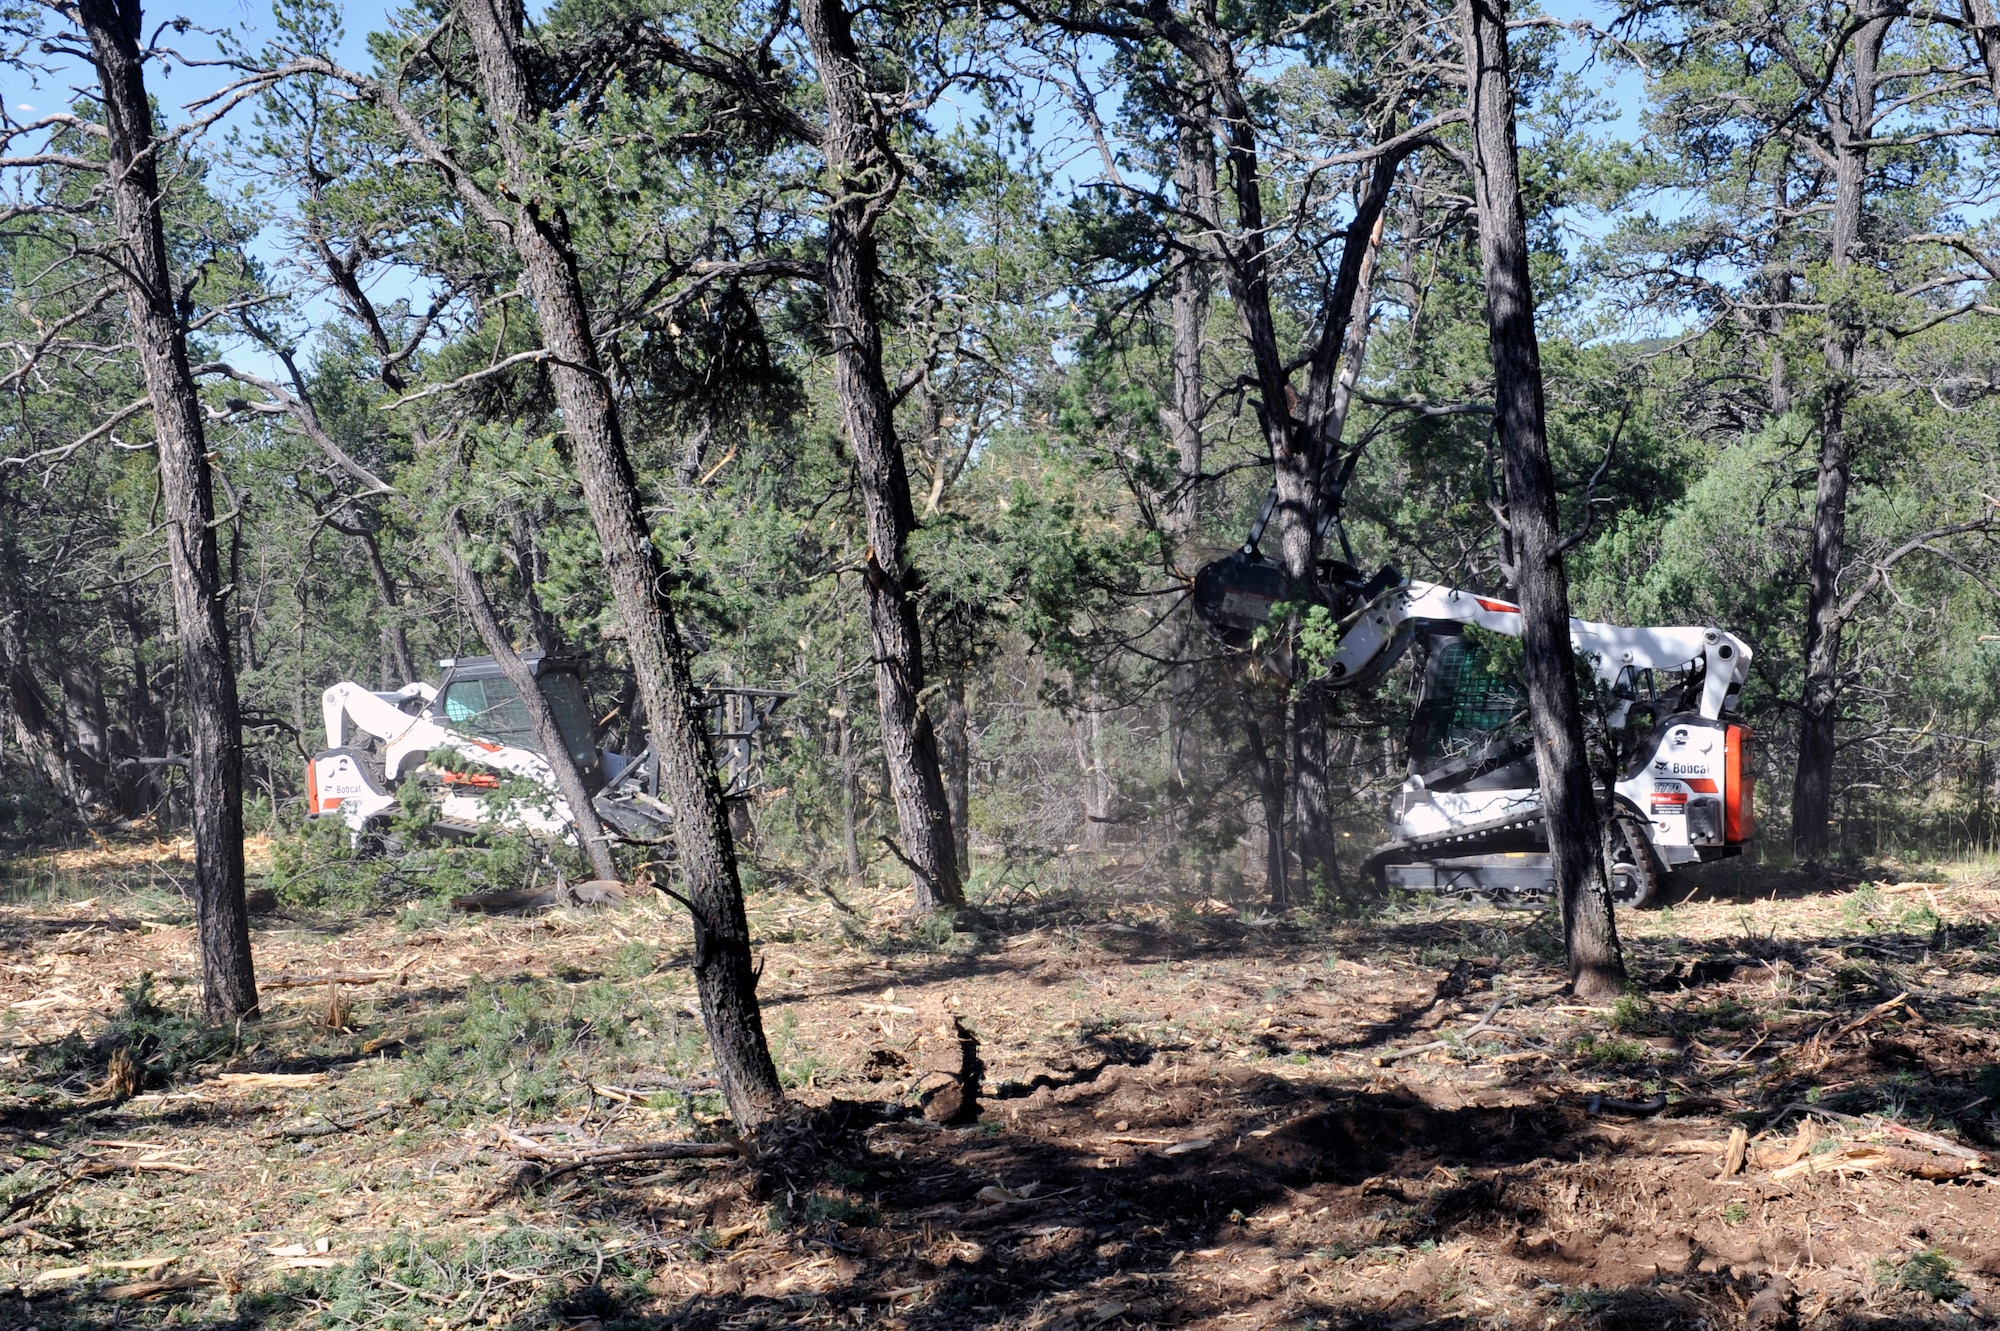 Two members of the Kirtland’s Wildland Support Module use skid steer loaders to masticate overgrowth in the eastern-most remote forest area of Kirtland Air Force Base, N.M., July 18, 2019. The team of six wildland firefighters have thinned out 70 acres of forest expanding on the initial fuel breaks that were created since the project broke ground in spring of 2019.  (U.S. Air Force photo by Staff Sgt. Dylan Nuckolls)